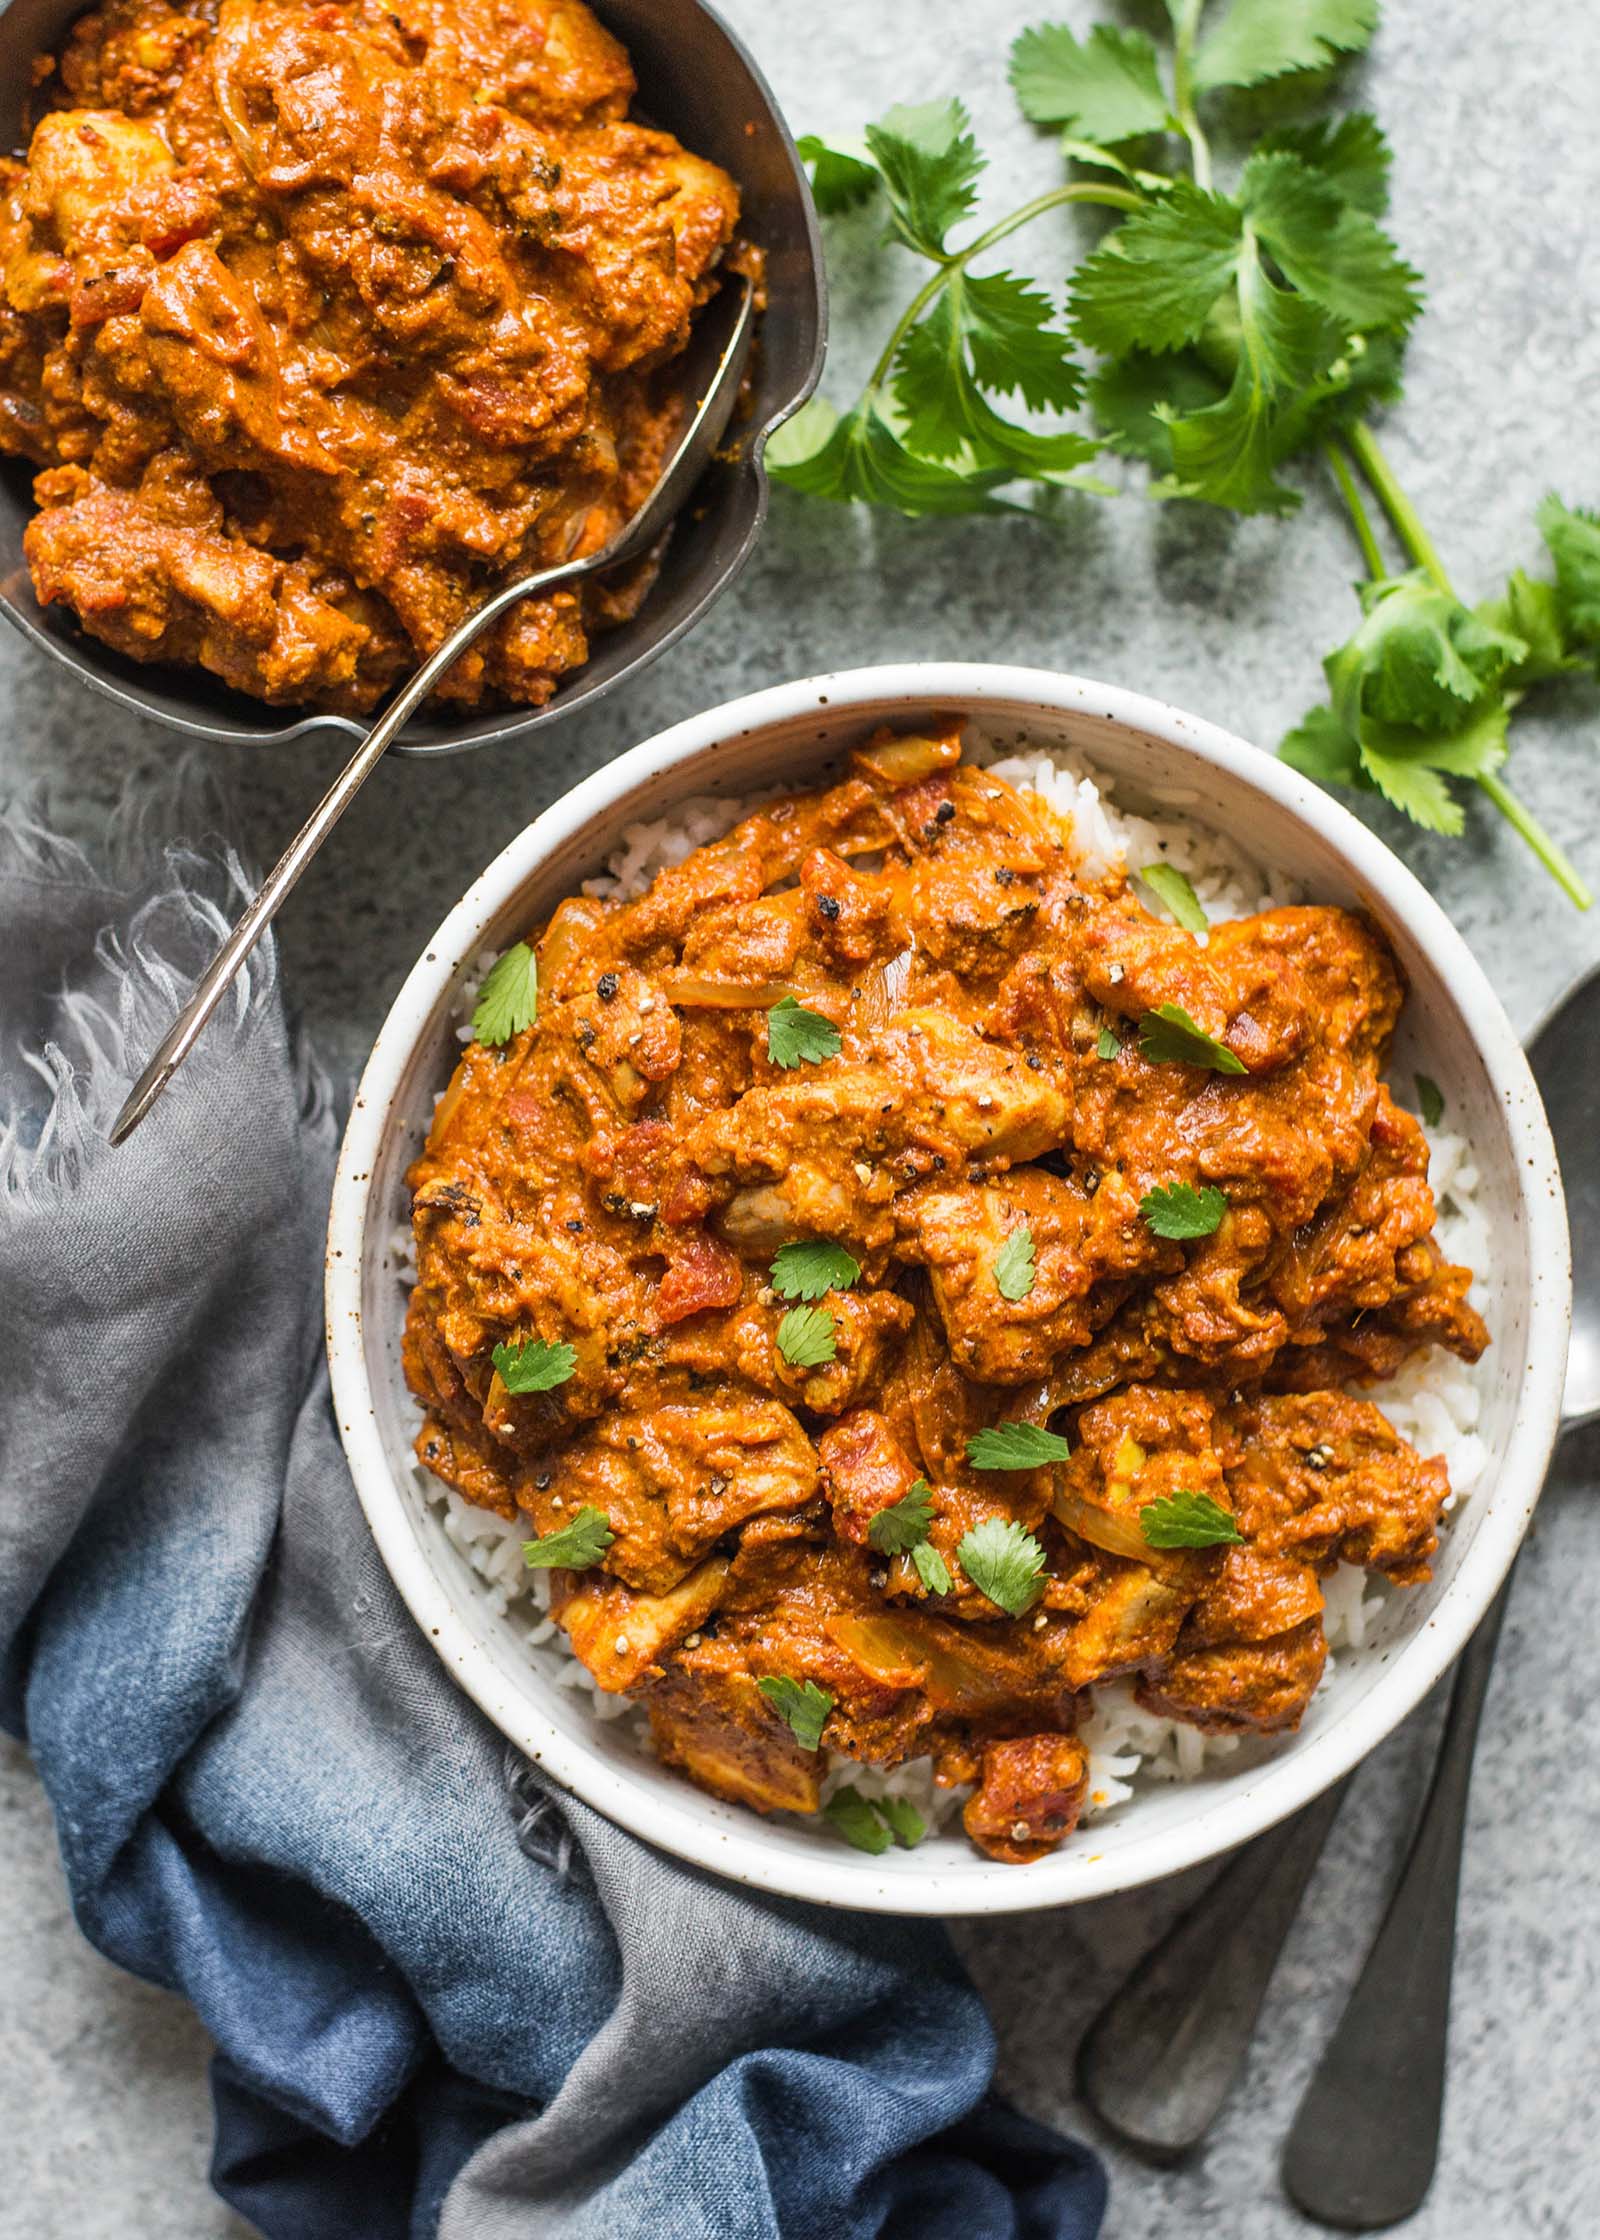 Chicken Tikka Masala Recipe in a bowl with rice and cilantro sprigs